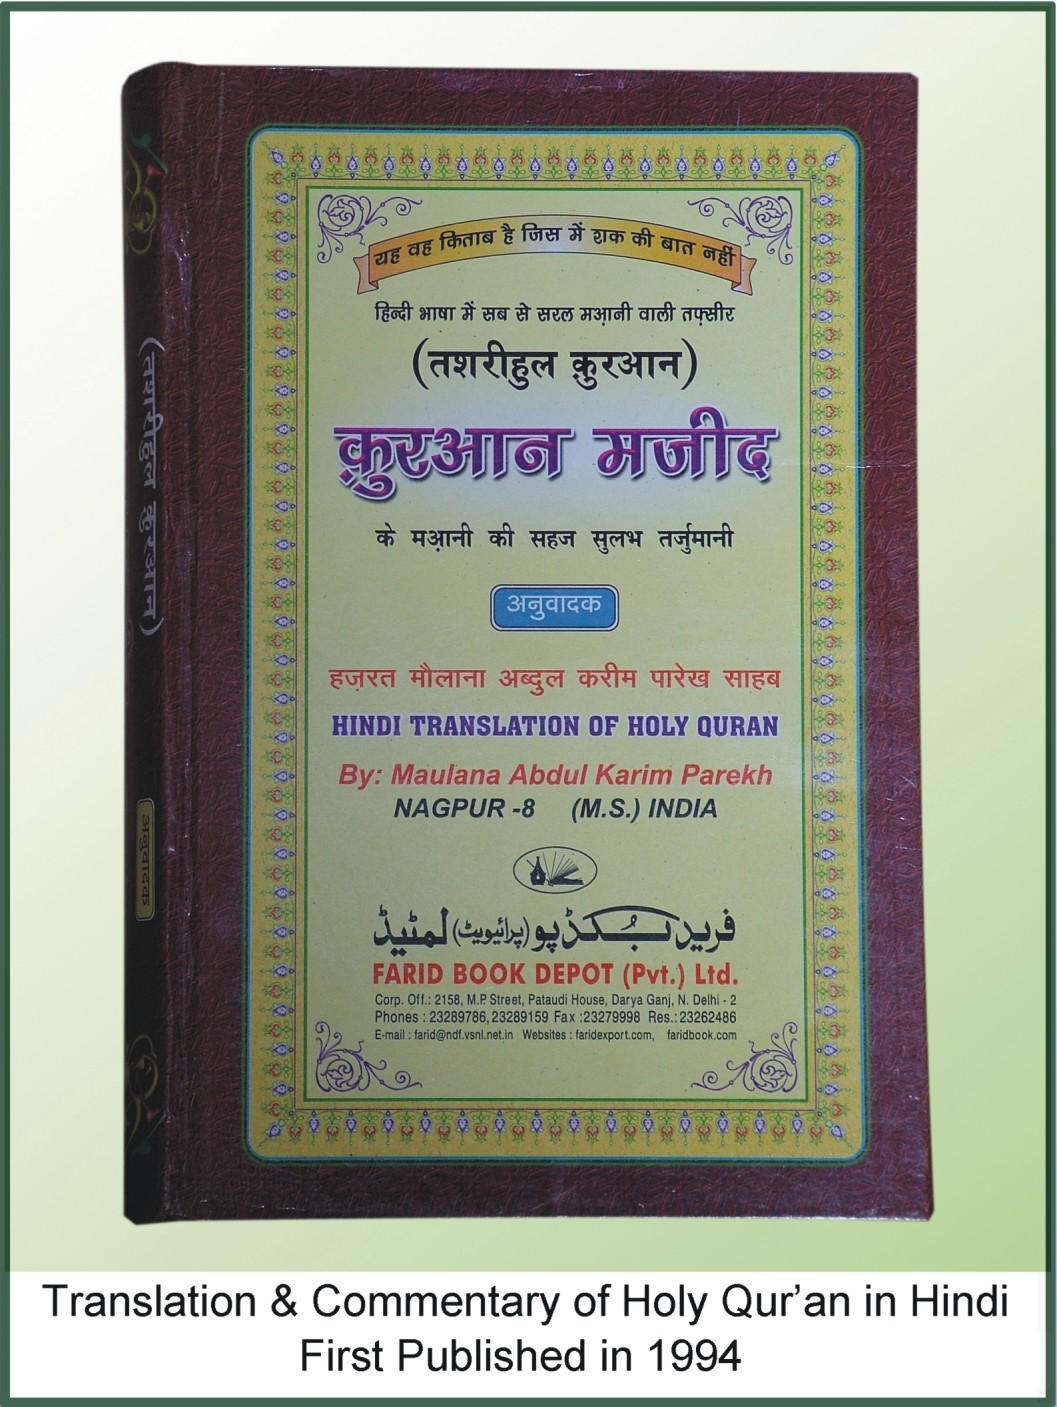 Translation & Commentary of The Holy Qur'an (Hindi) First Published in 1994